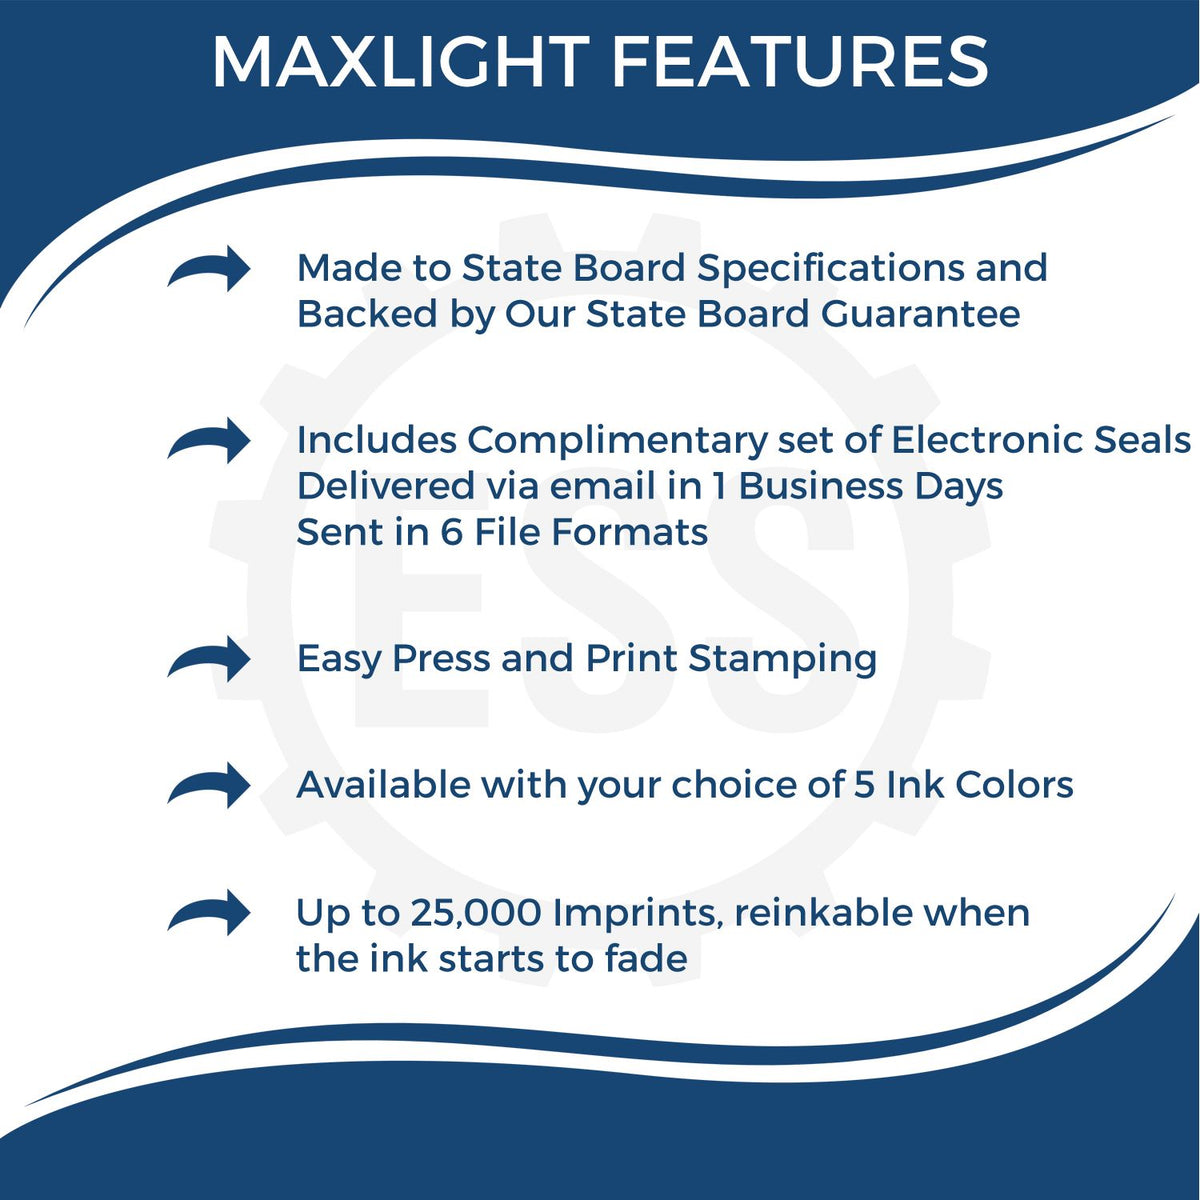 A picture of an infographic highlighting the selling points for the Premium MaxLight Pre-Inked Rhode Island Engineering Stamp